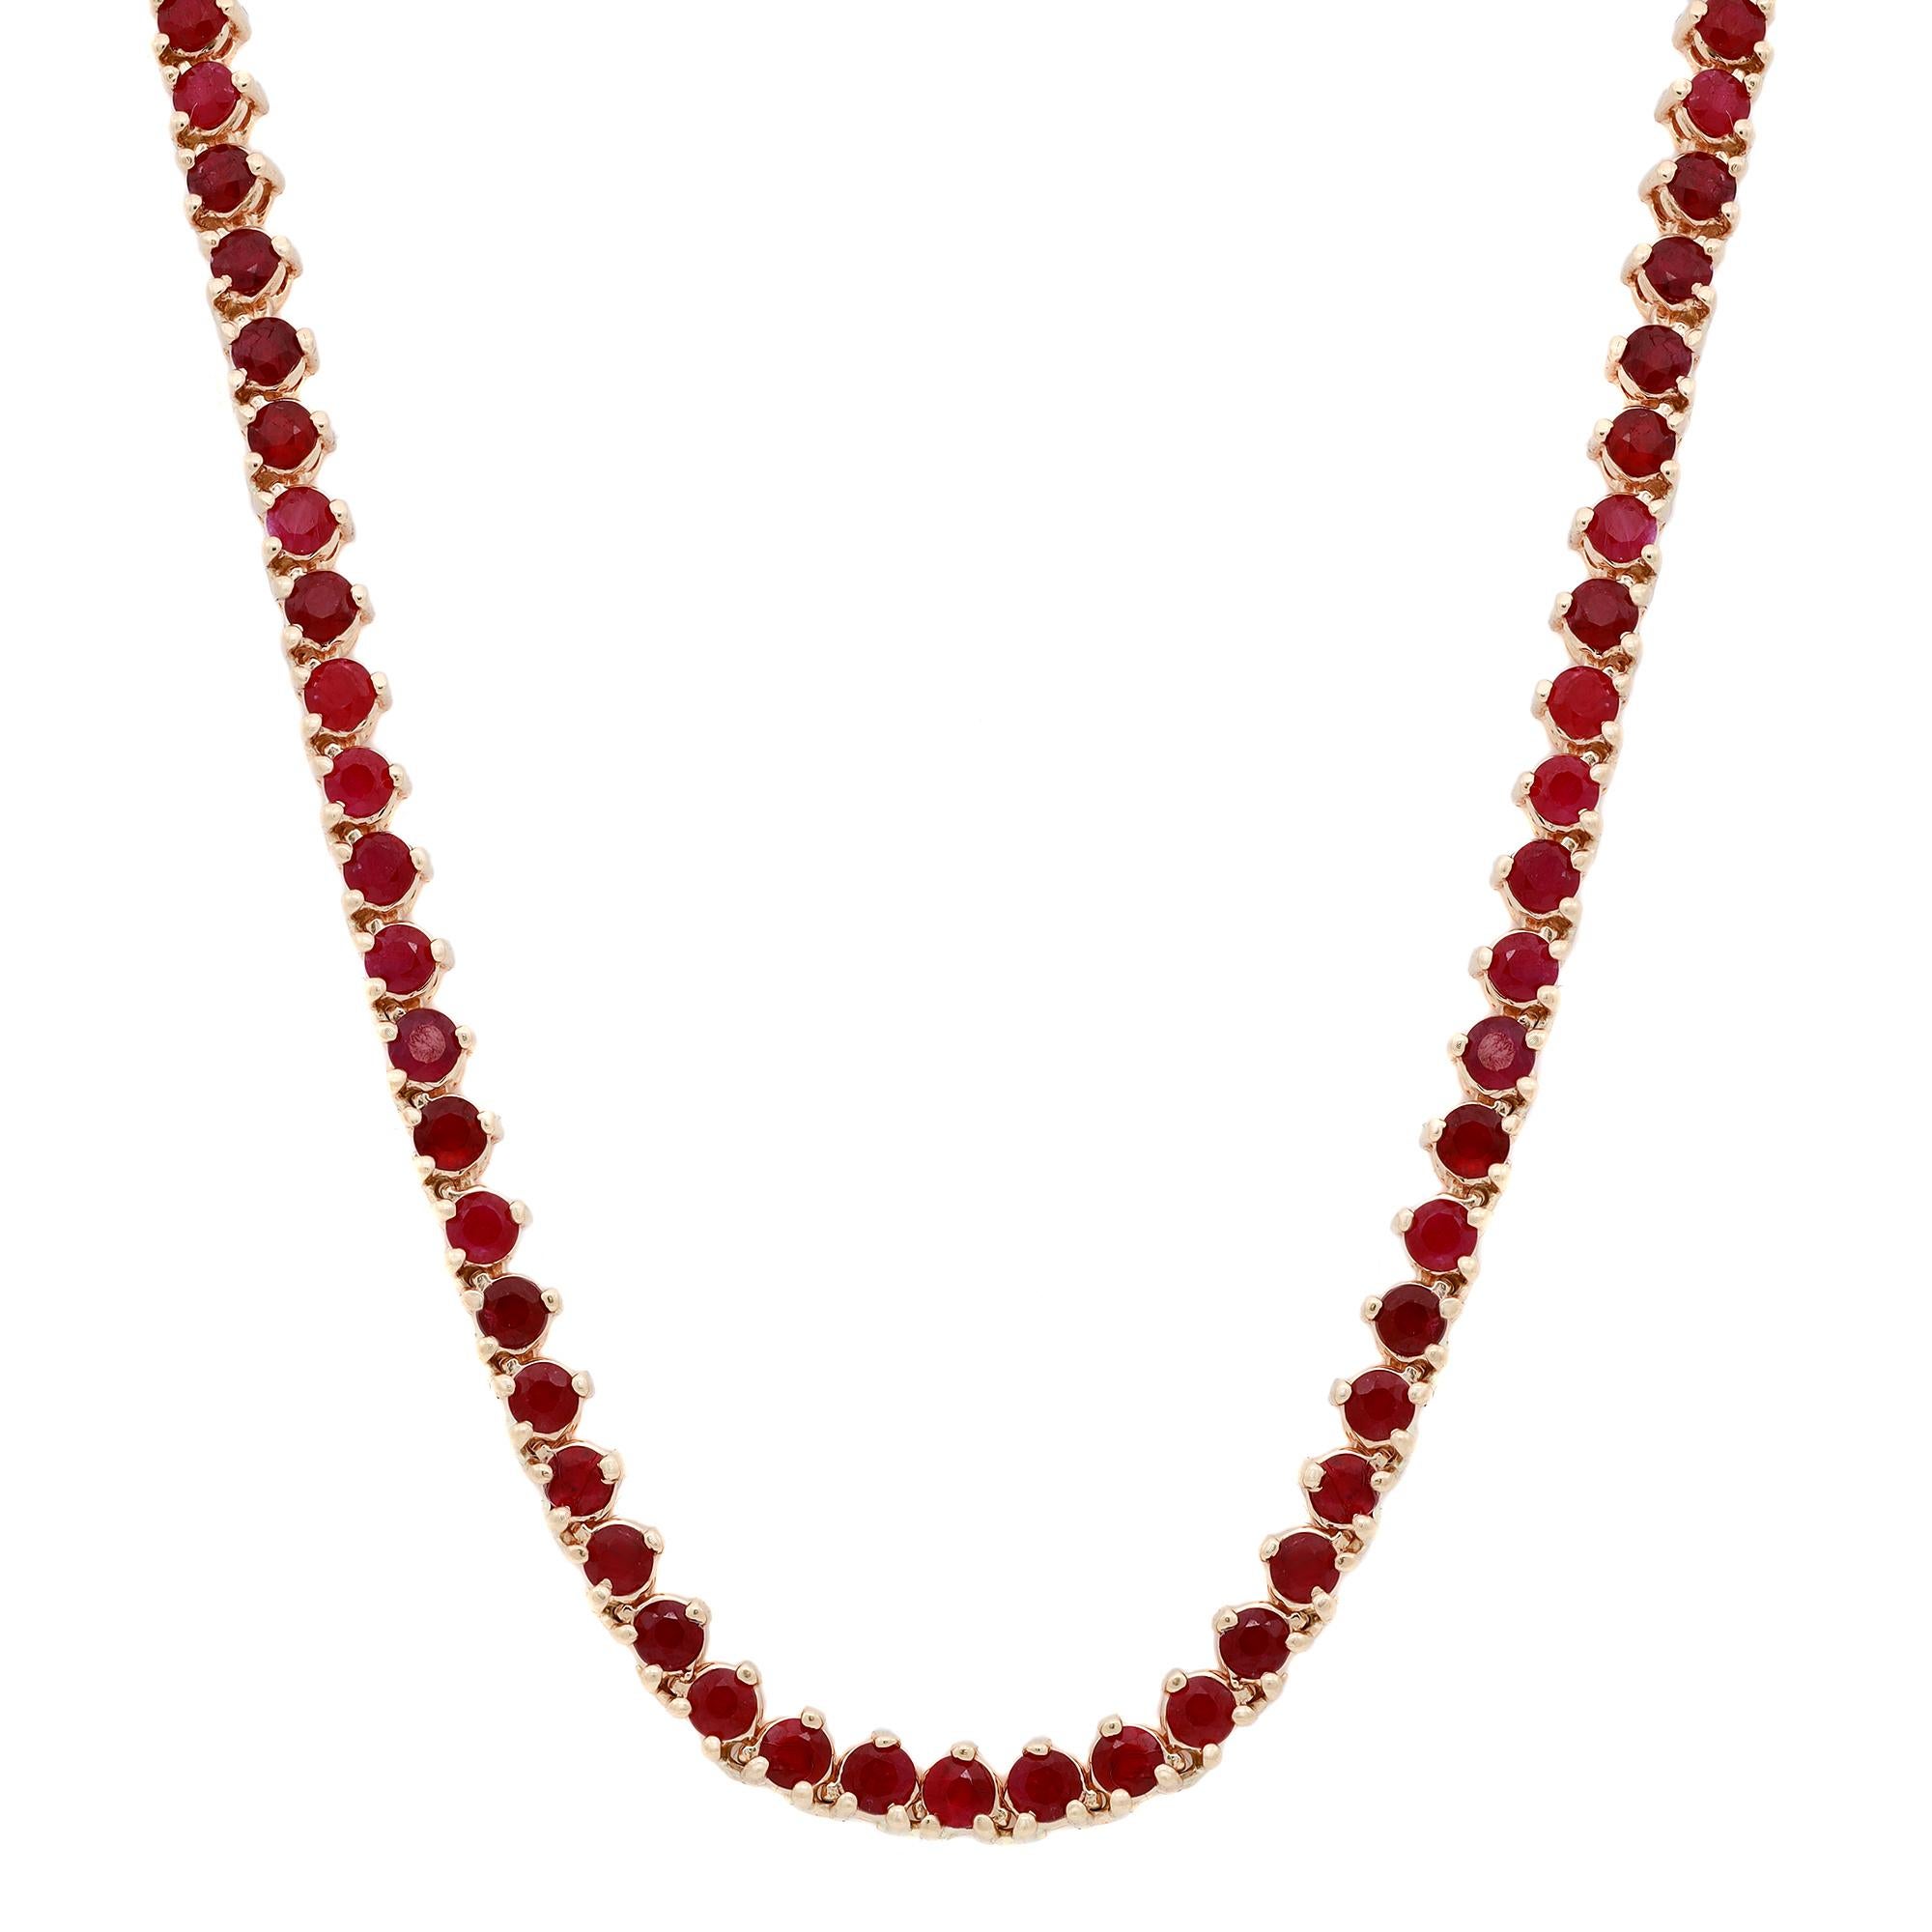 This luxury Ruby chain choker necklace is set with 4.69 carats of round cut rubies. Beautifully handcrafted in 14k yellow gold. This Choker features 65 breathtaking Rubies that speak for themselves with cable link chain. Perfectly stunning and a